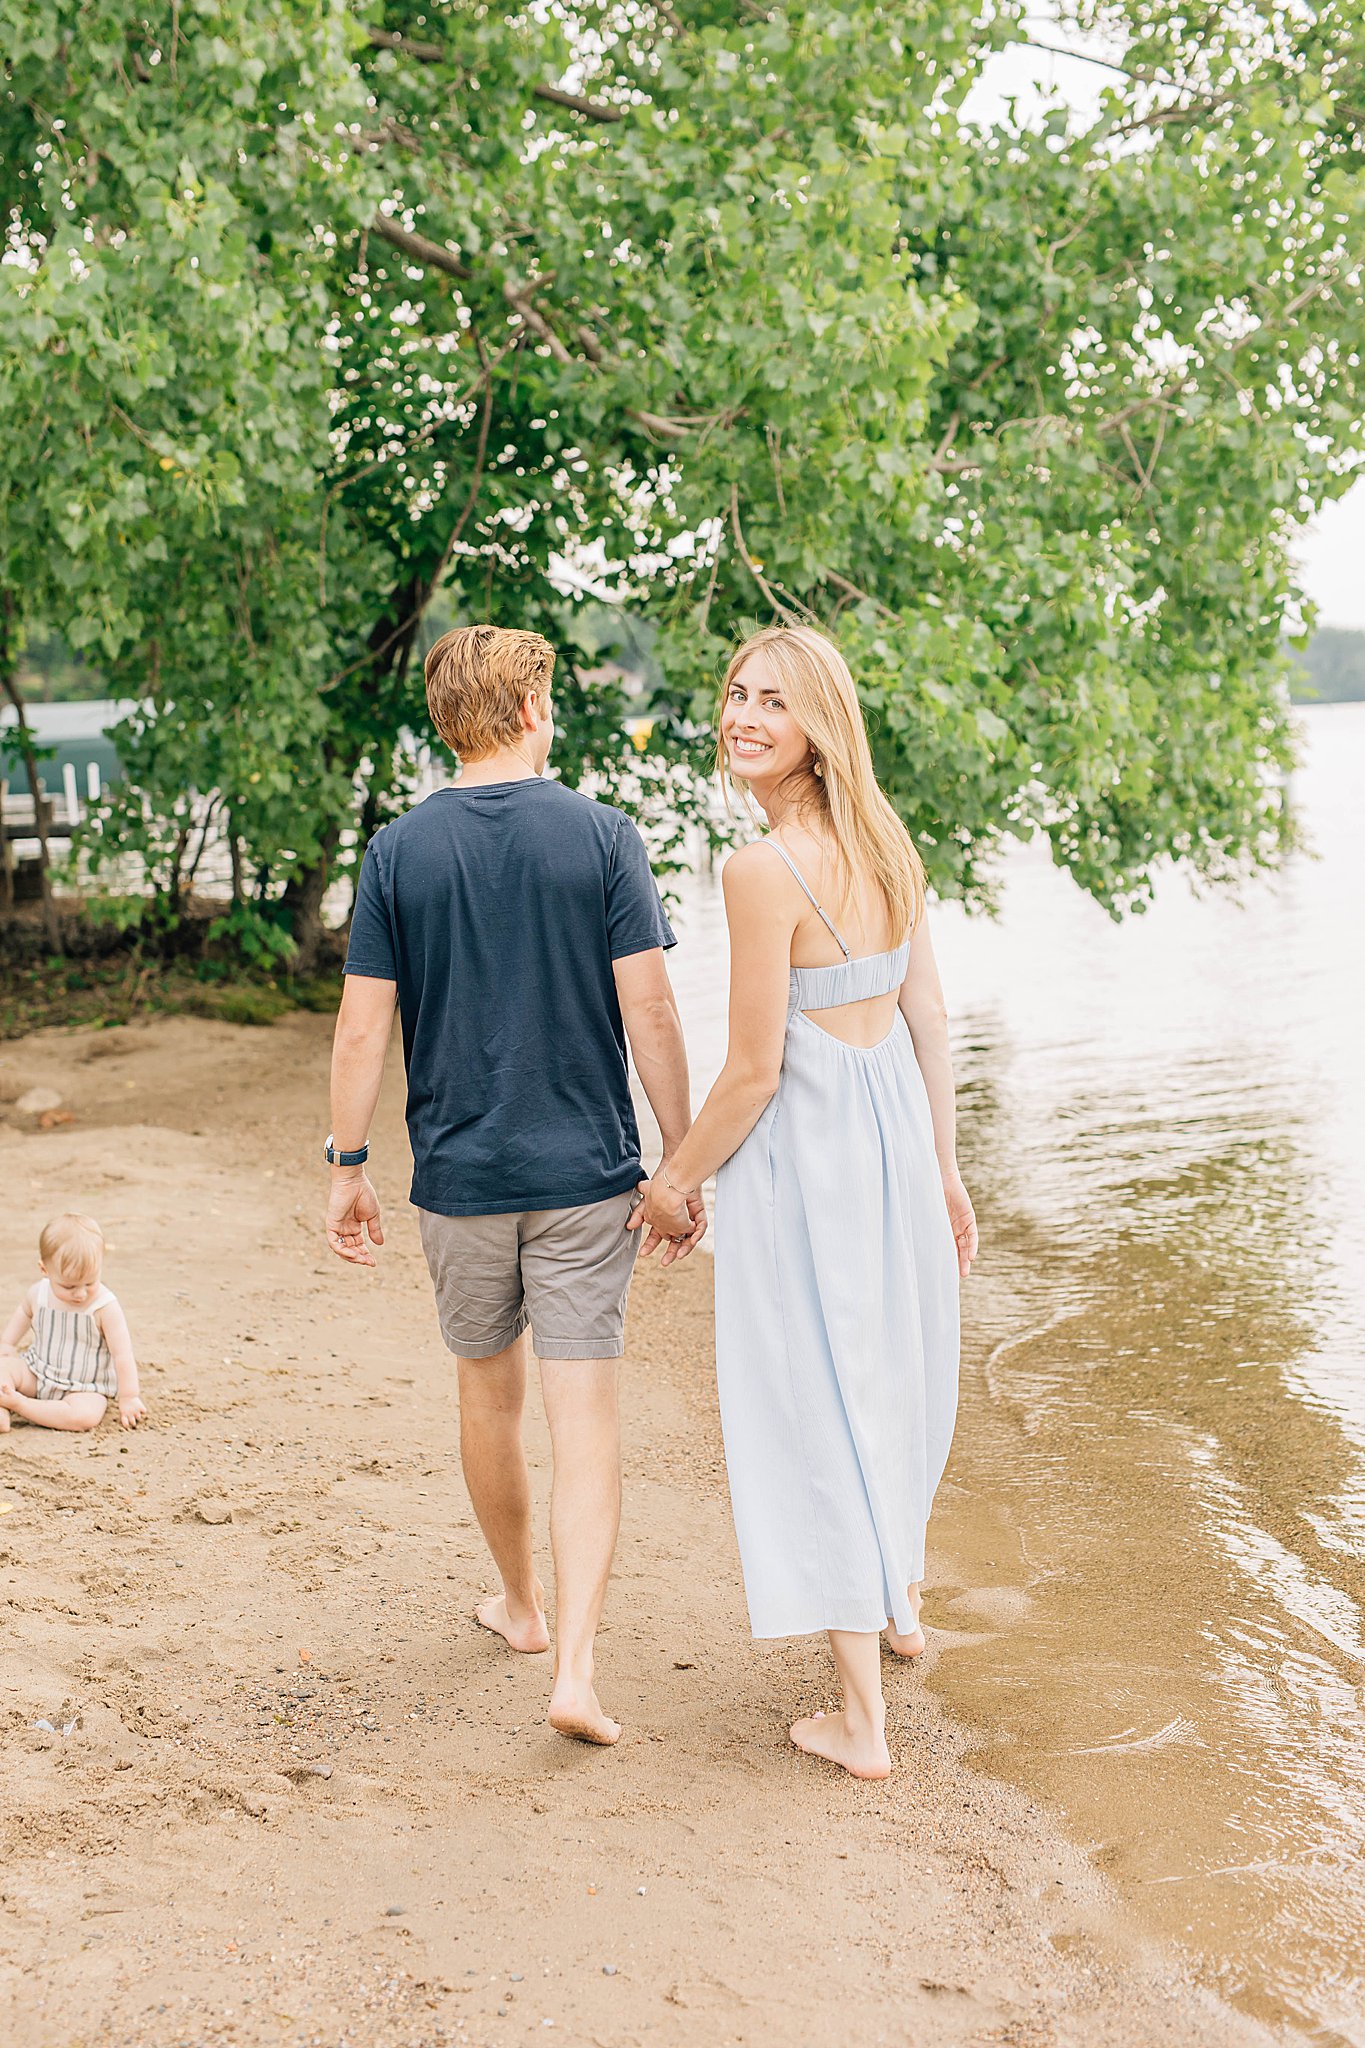 Dad and mom holding hands while walking during Lake Minnetonka Family Pictures.